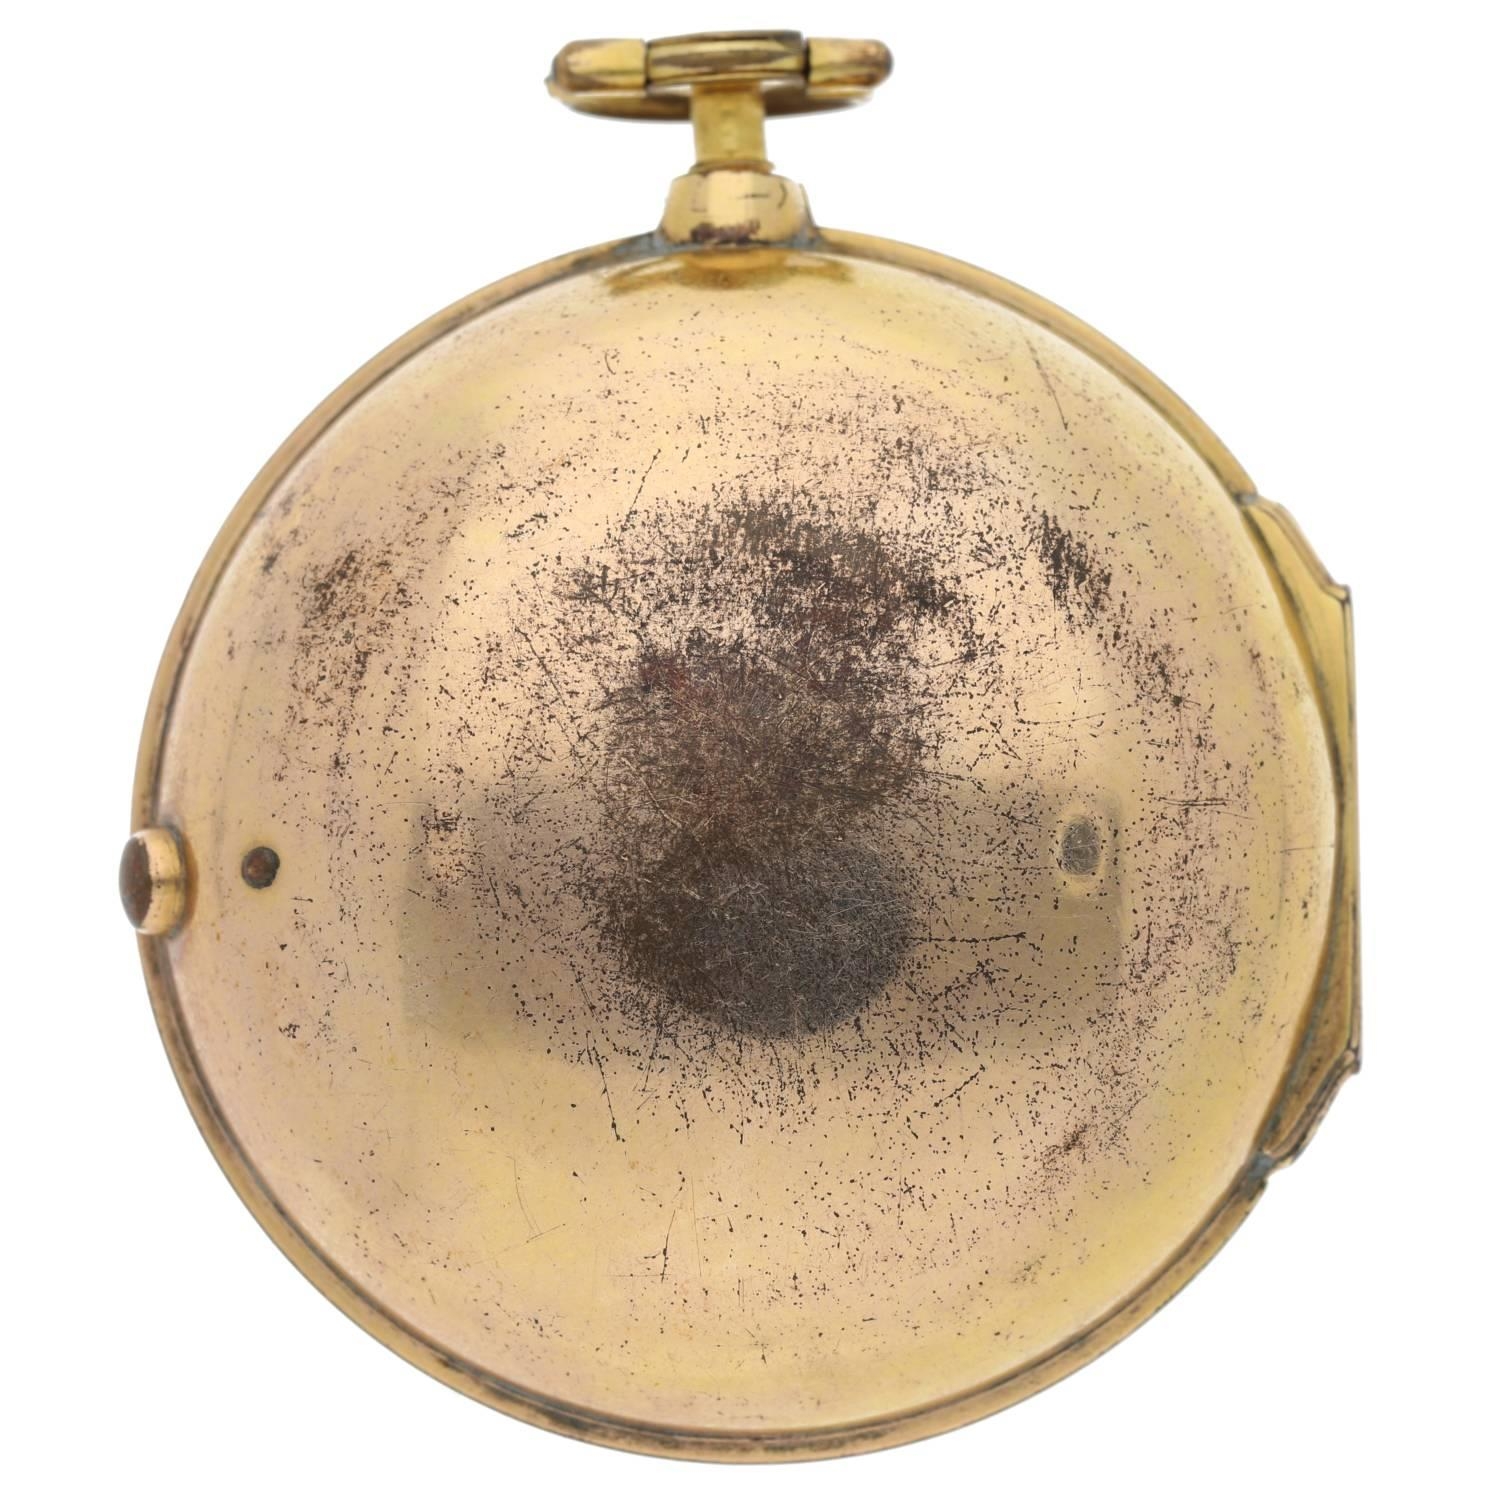 Symons, London - late 17th century English gold and gilt pair cased verge pocket watch, signed - Image 10 of 11